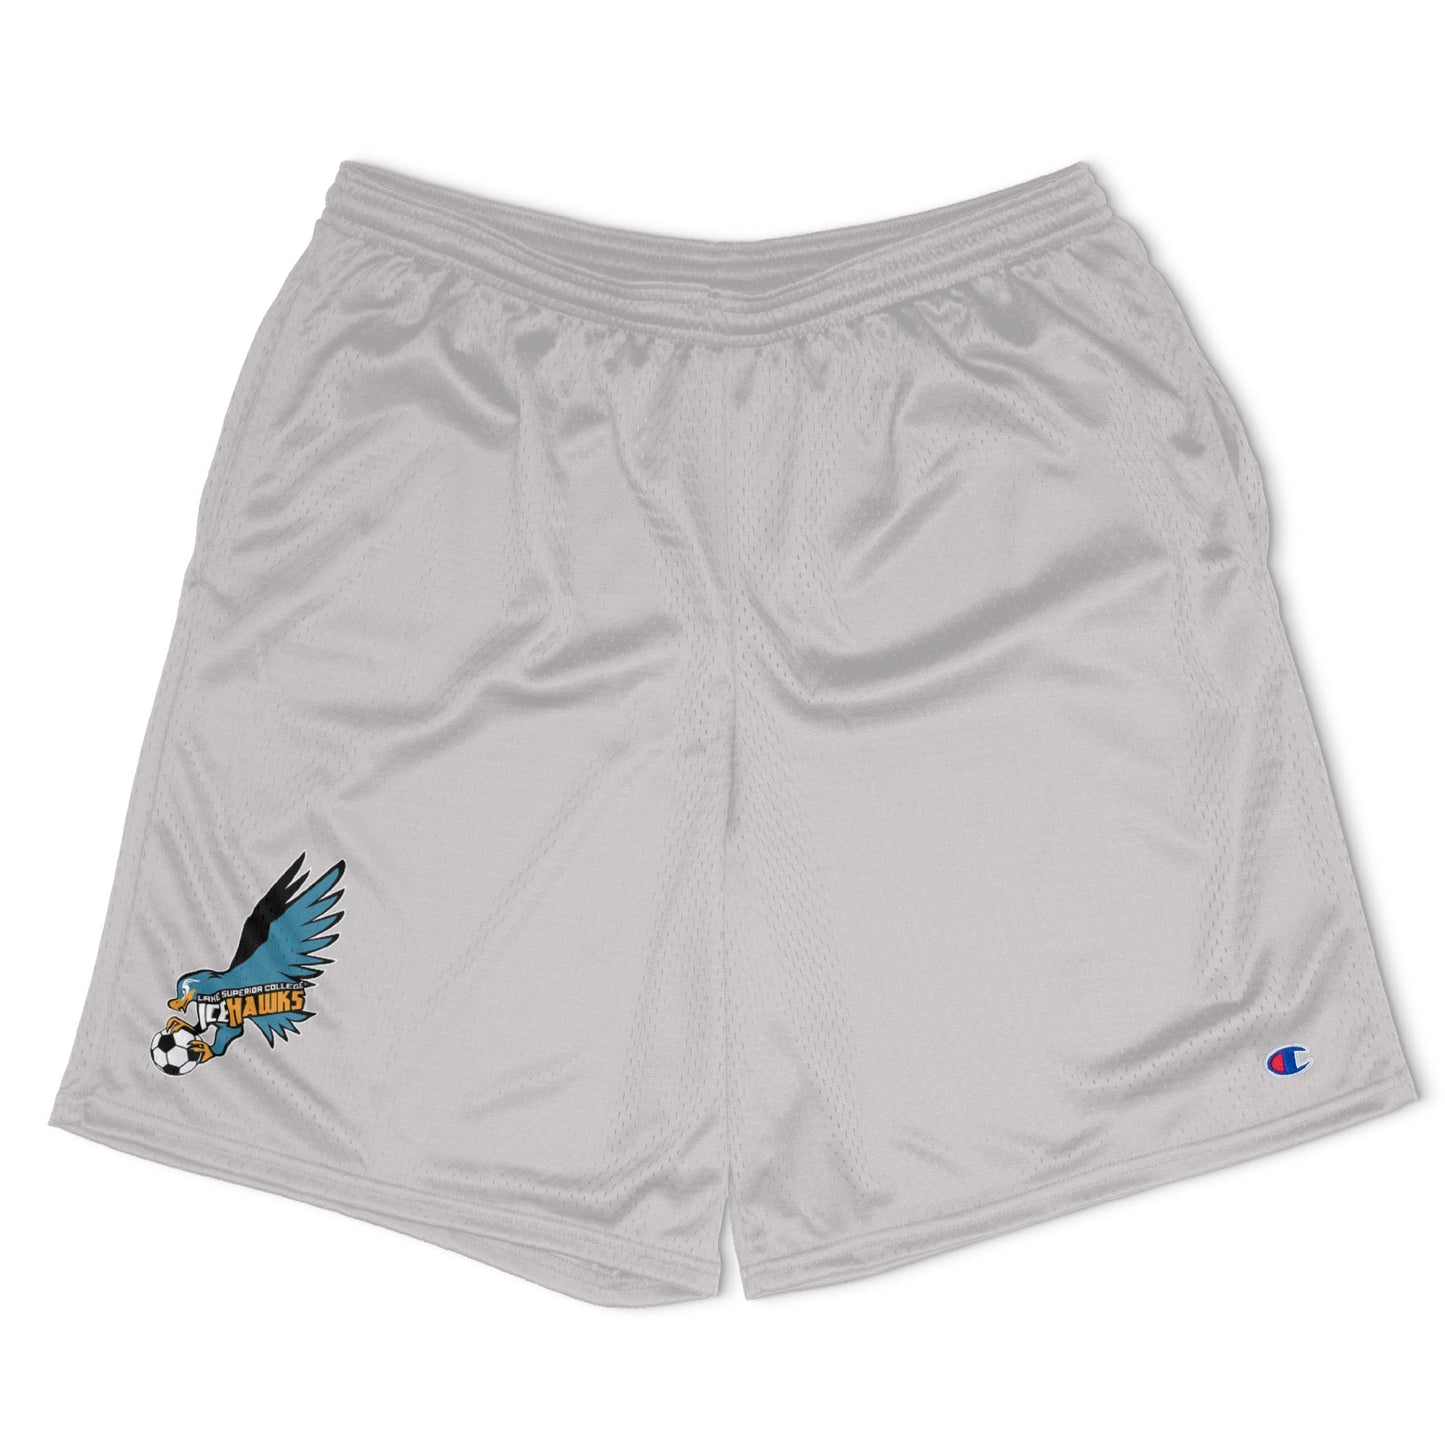 LSC Ice Hawks Champion - Polyester Mesh 9" Shorts with Pockets